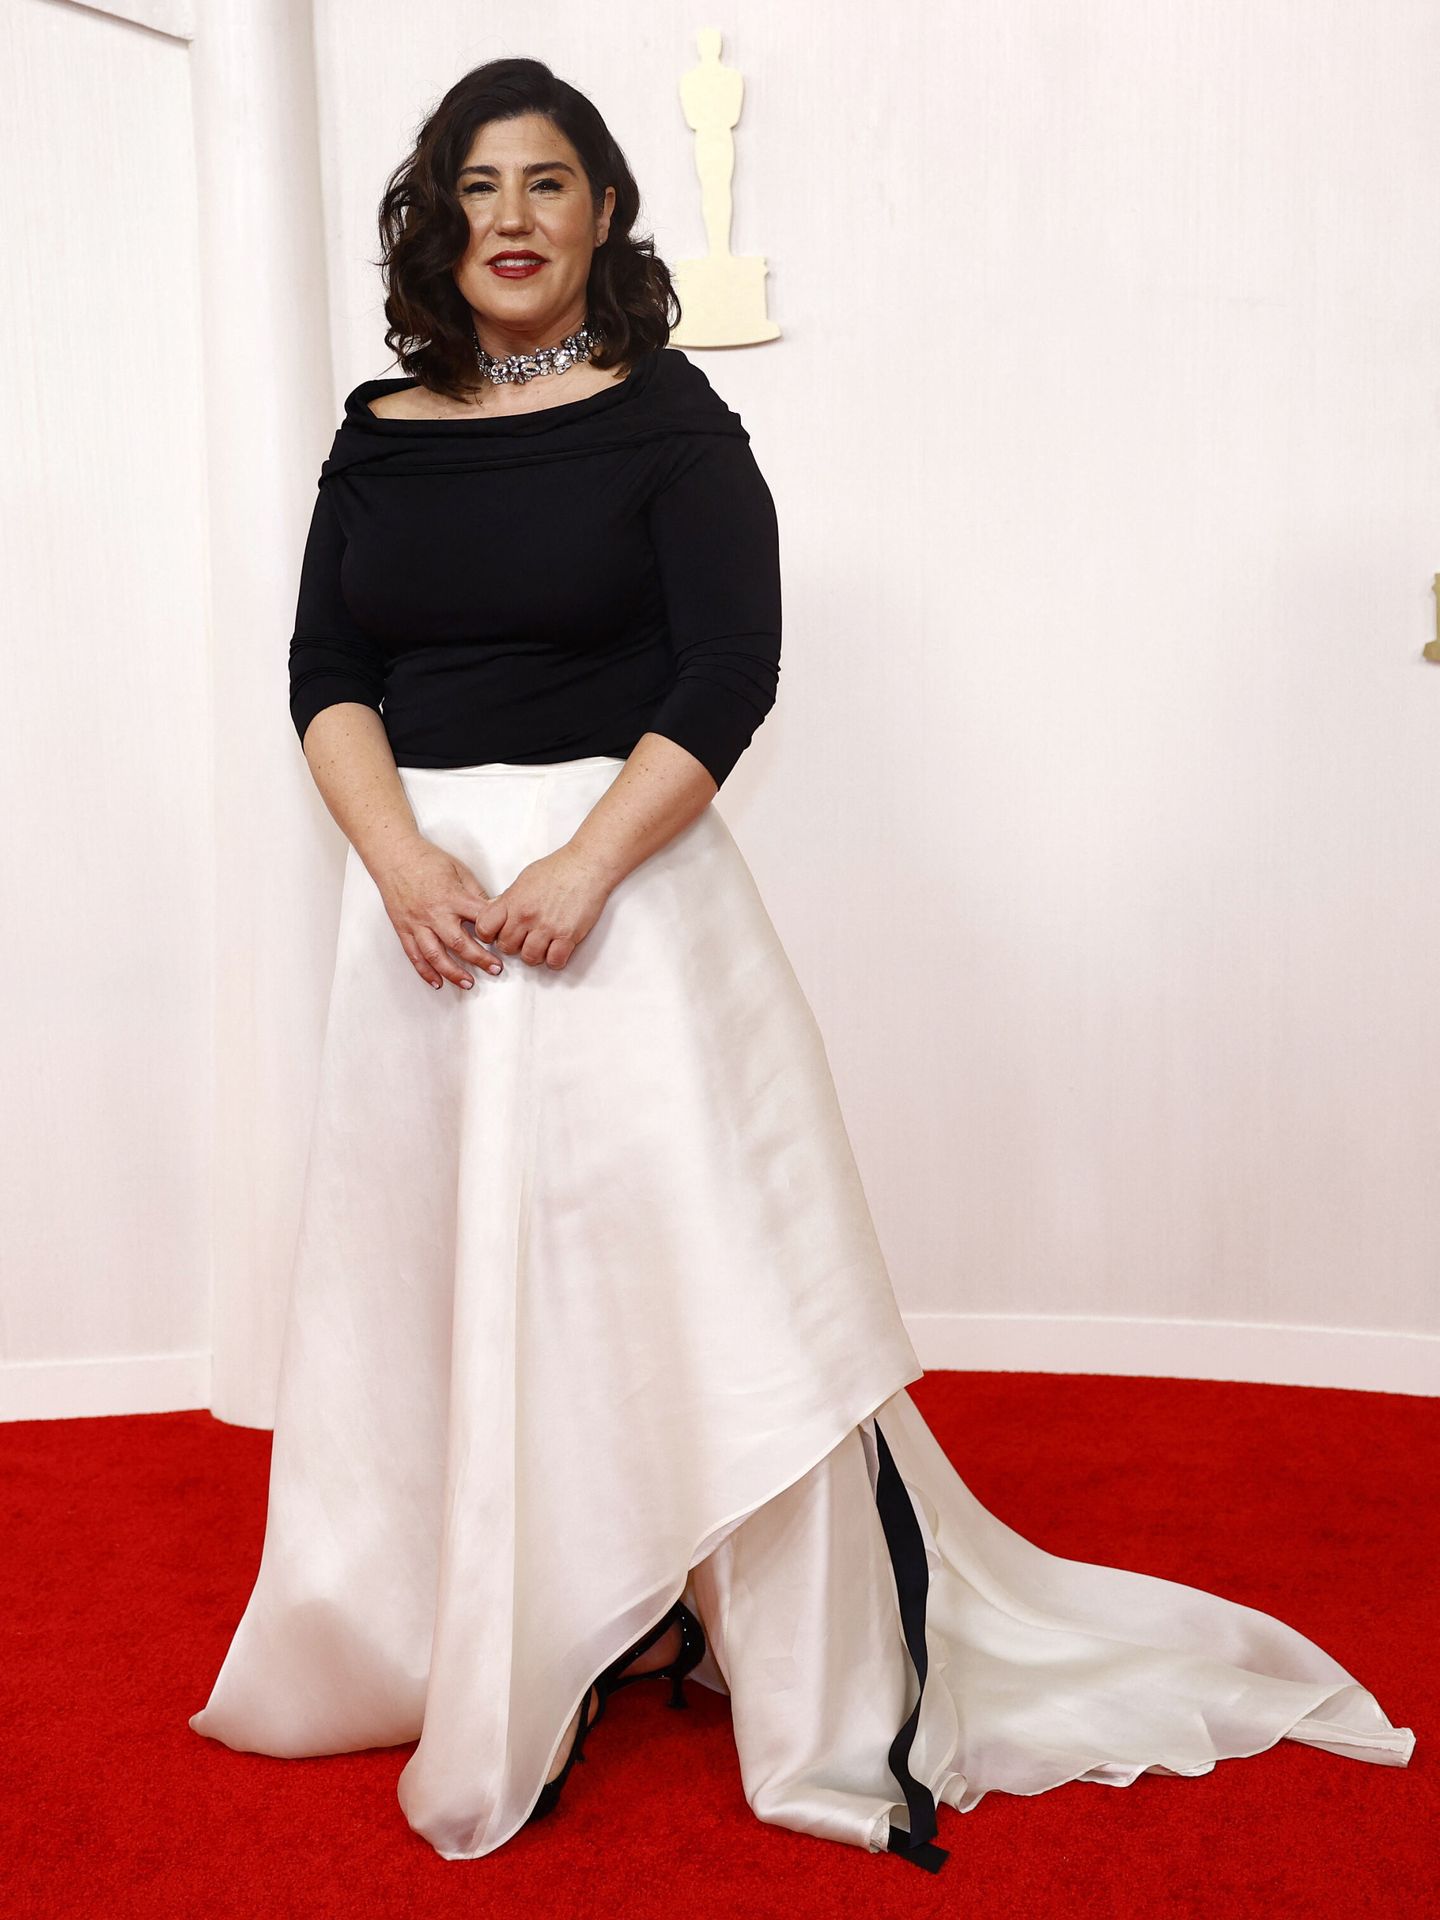 Sandra Tapia poses on the red carpet during the Oscars arrivals at the 96th Academy Awards in Hollywood, Los Angeles, California, U.S., March 10, 2024. REUTERS Sarah Meyssonnier